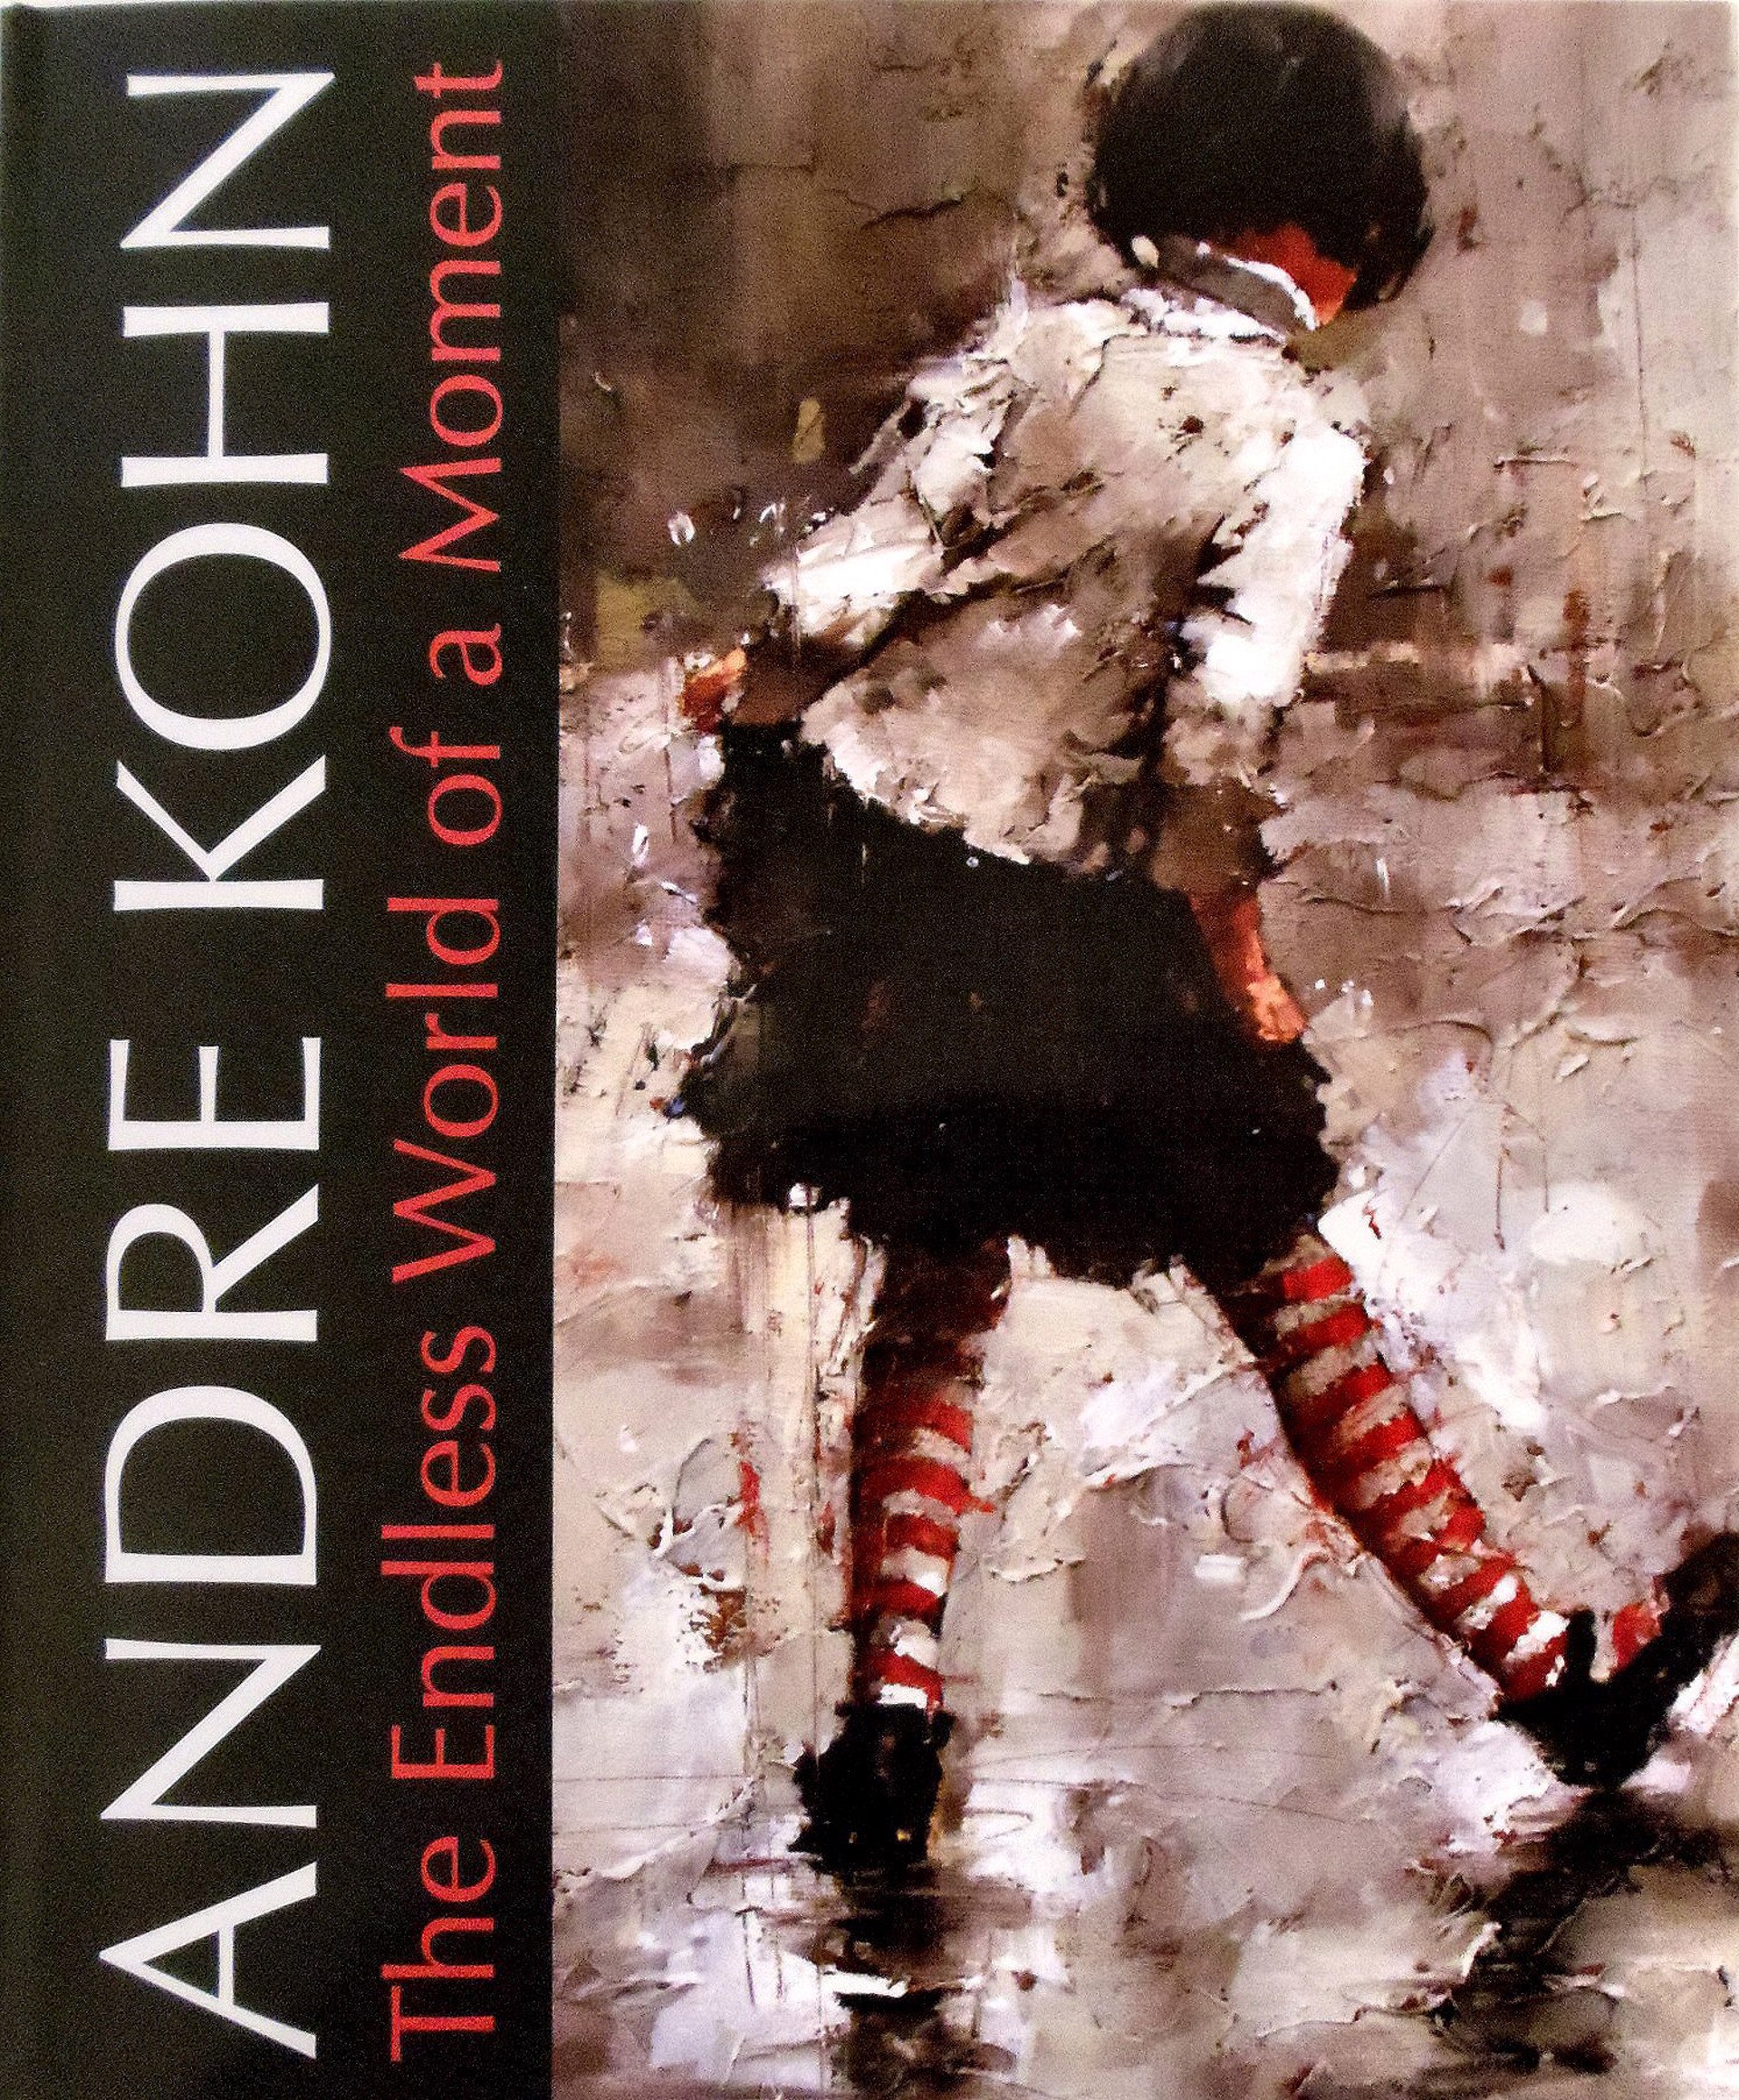 "The Endless World of a Moment" Unsigned Edition by Andre Kohn